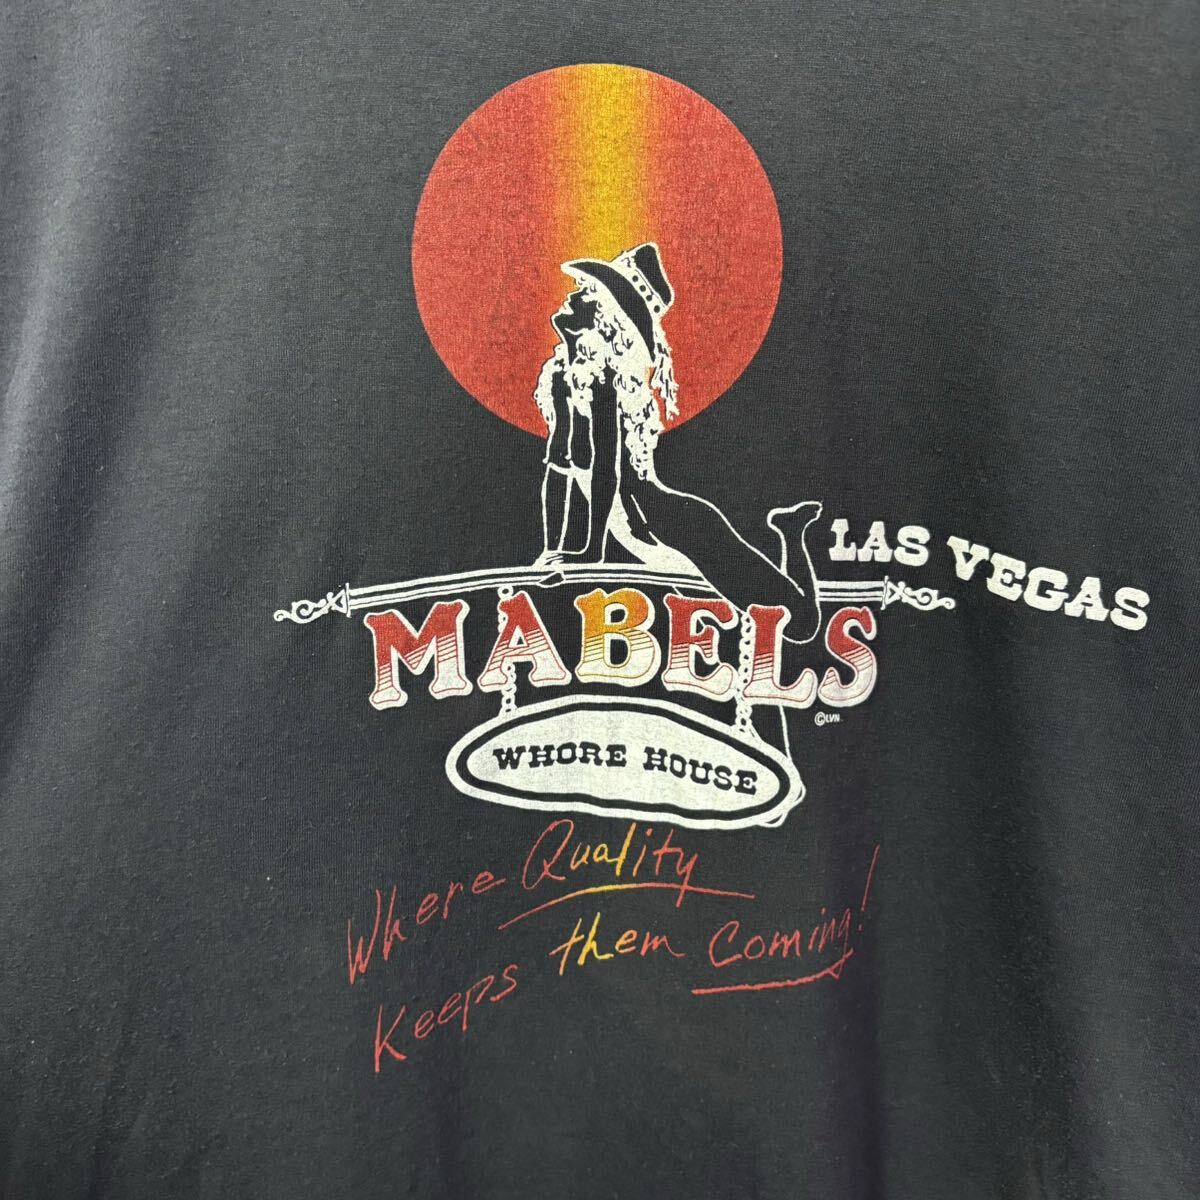 90s USA製　MABELS WHORE HOUSE LOS VEGAS グラフィック　Tシャツ　 アメカジ　古着　アメリカ古着　都内　中野区　古着屋_画像4